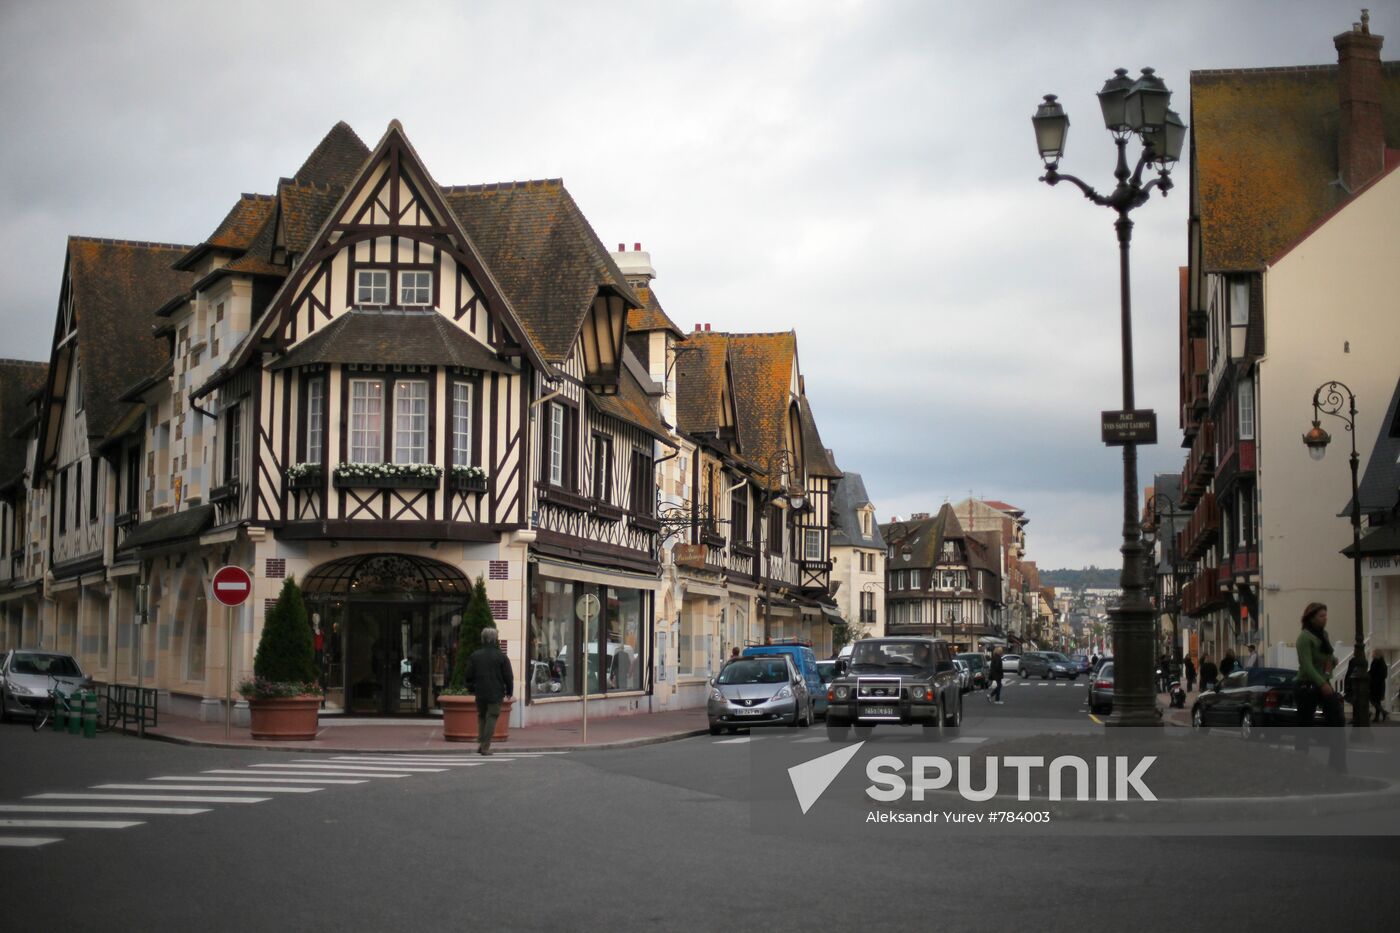 Resort town of Deauville